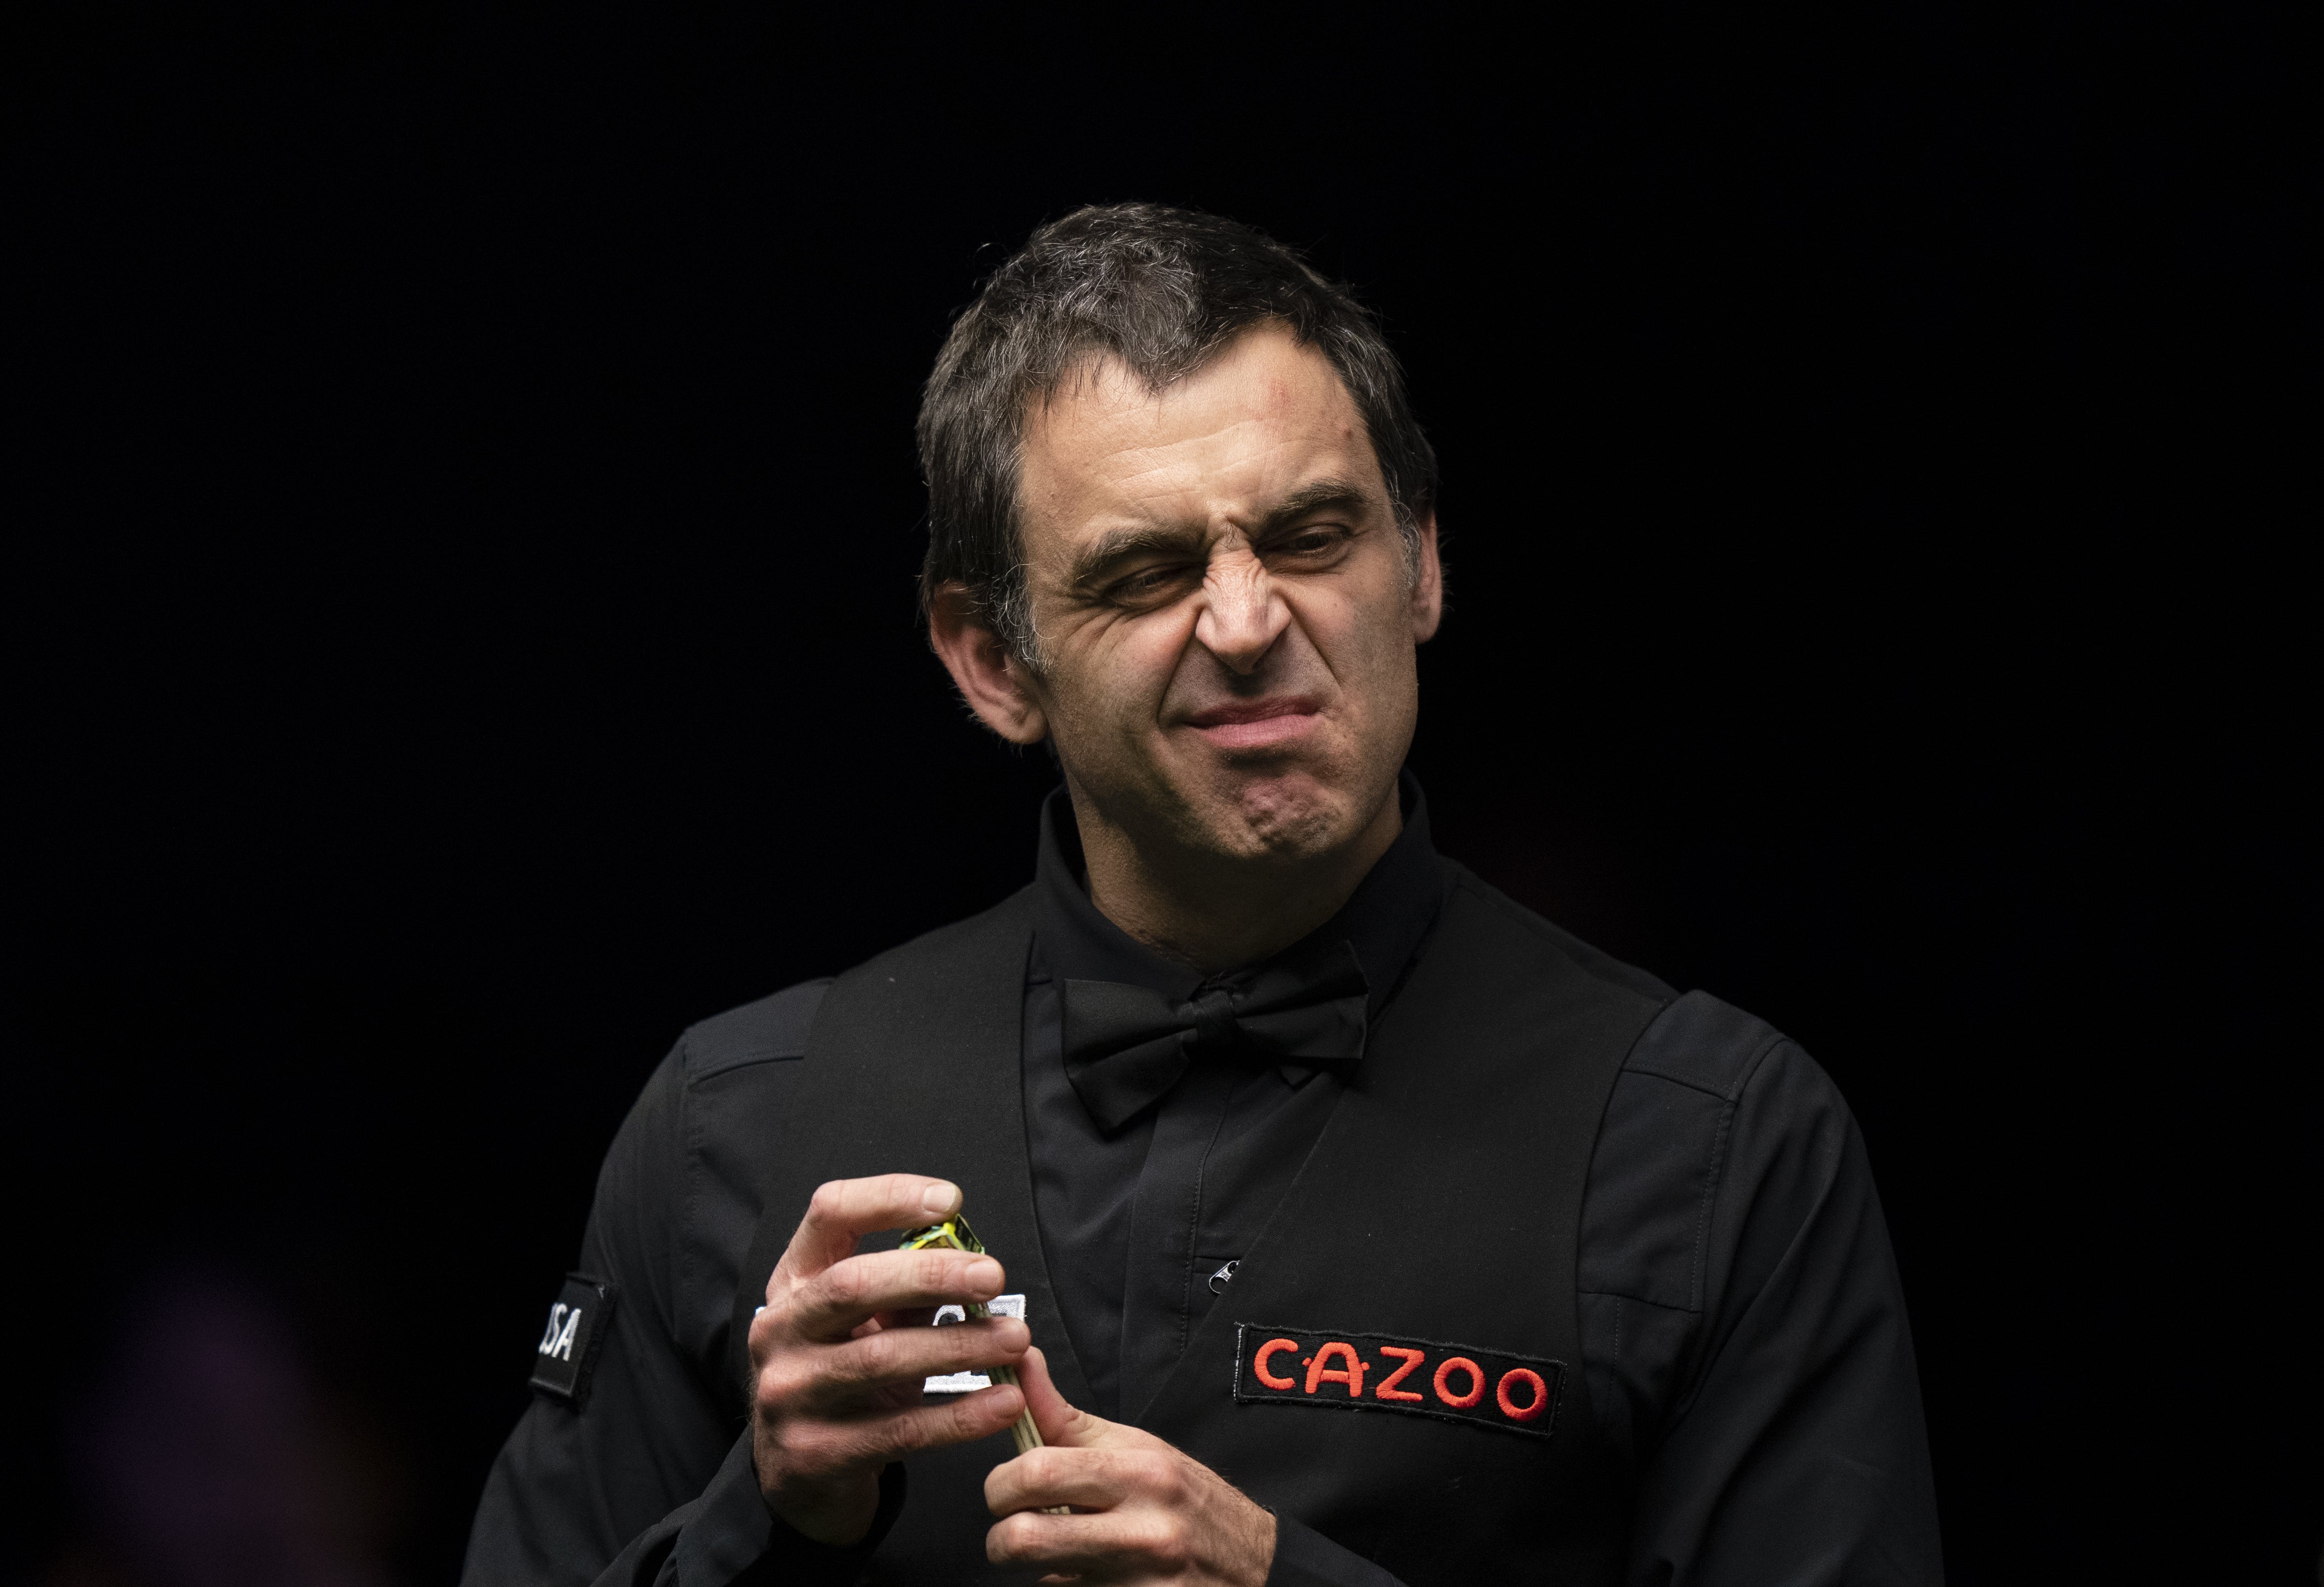 Ronnie O’Sullivan has compared himself to the heavyweight champion